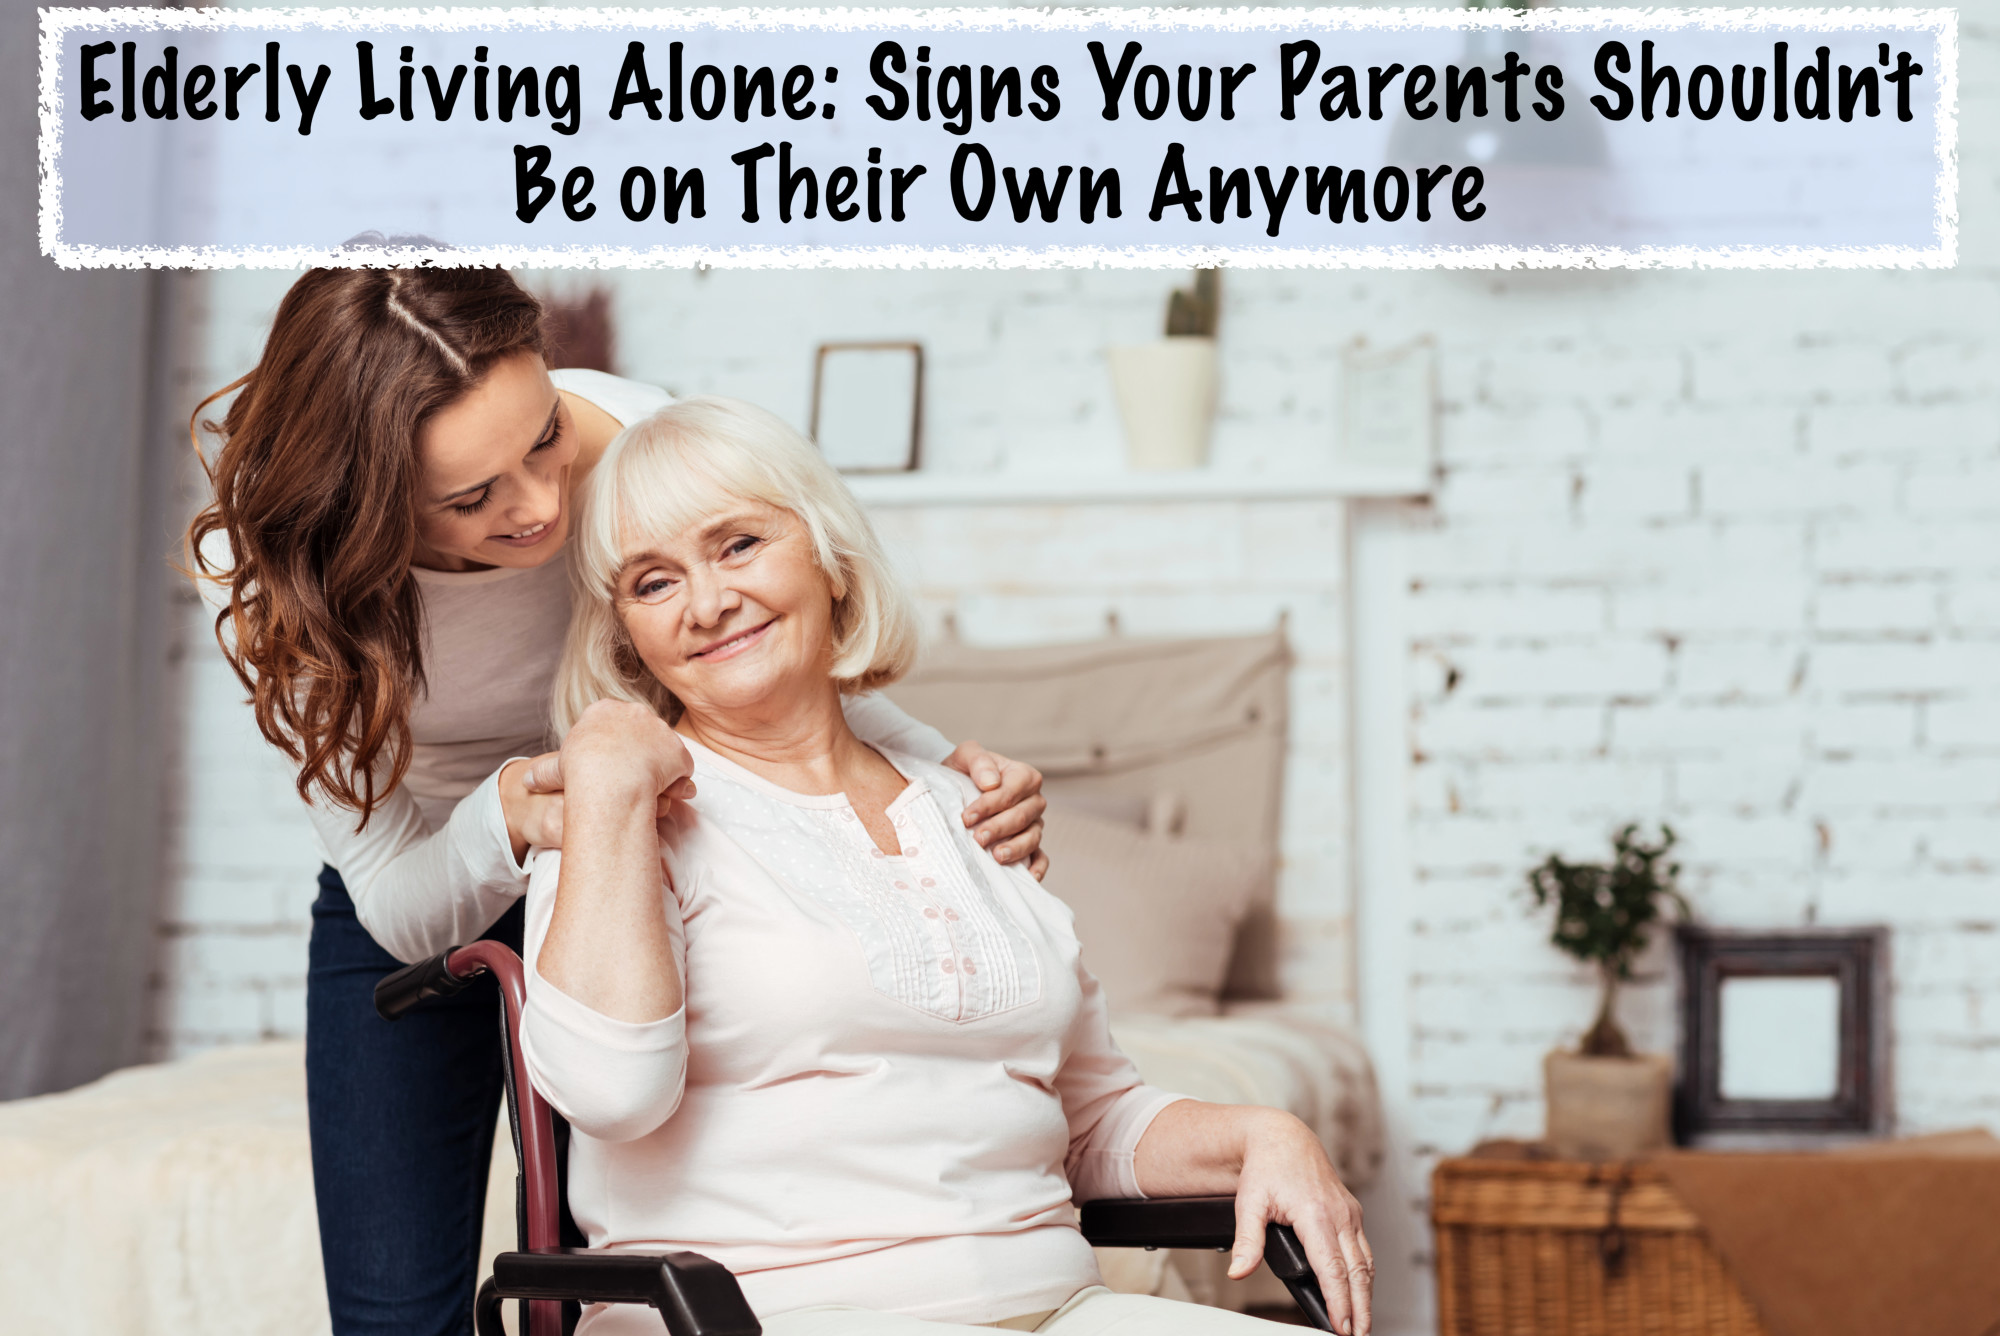 Elderly Living Alone: Signs Your Parents Shouldn't Be on Their Own Anymore